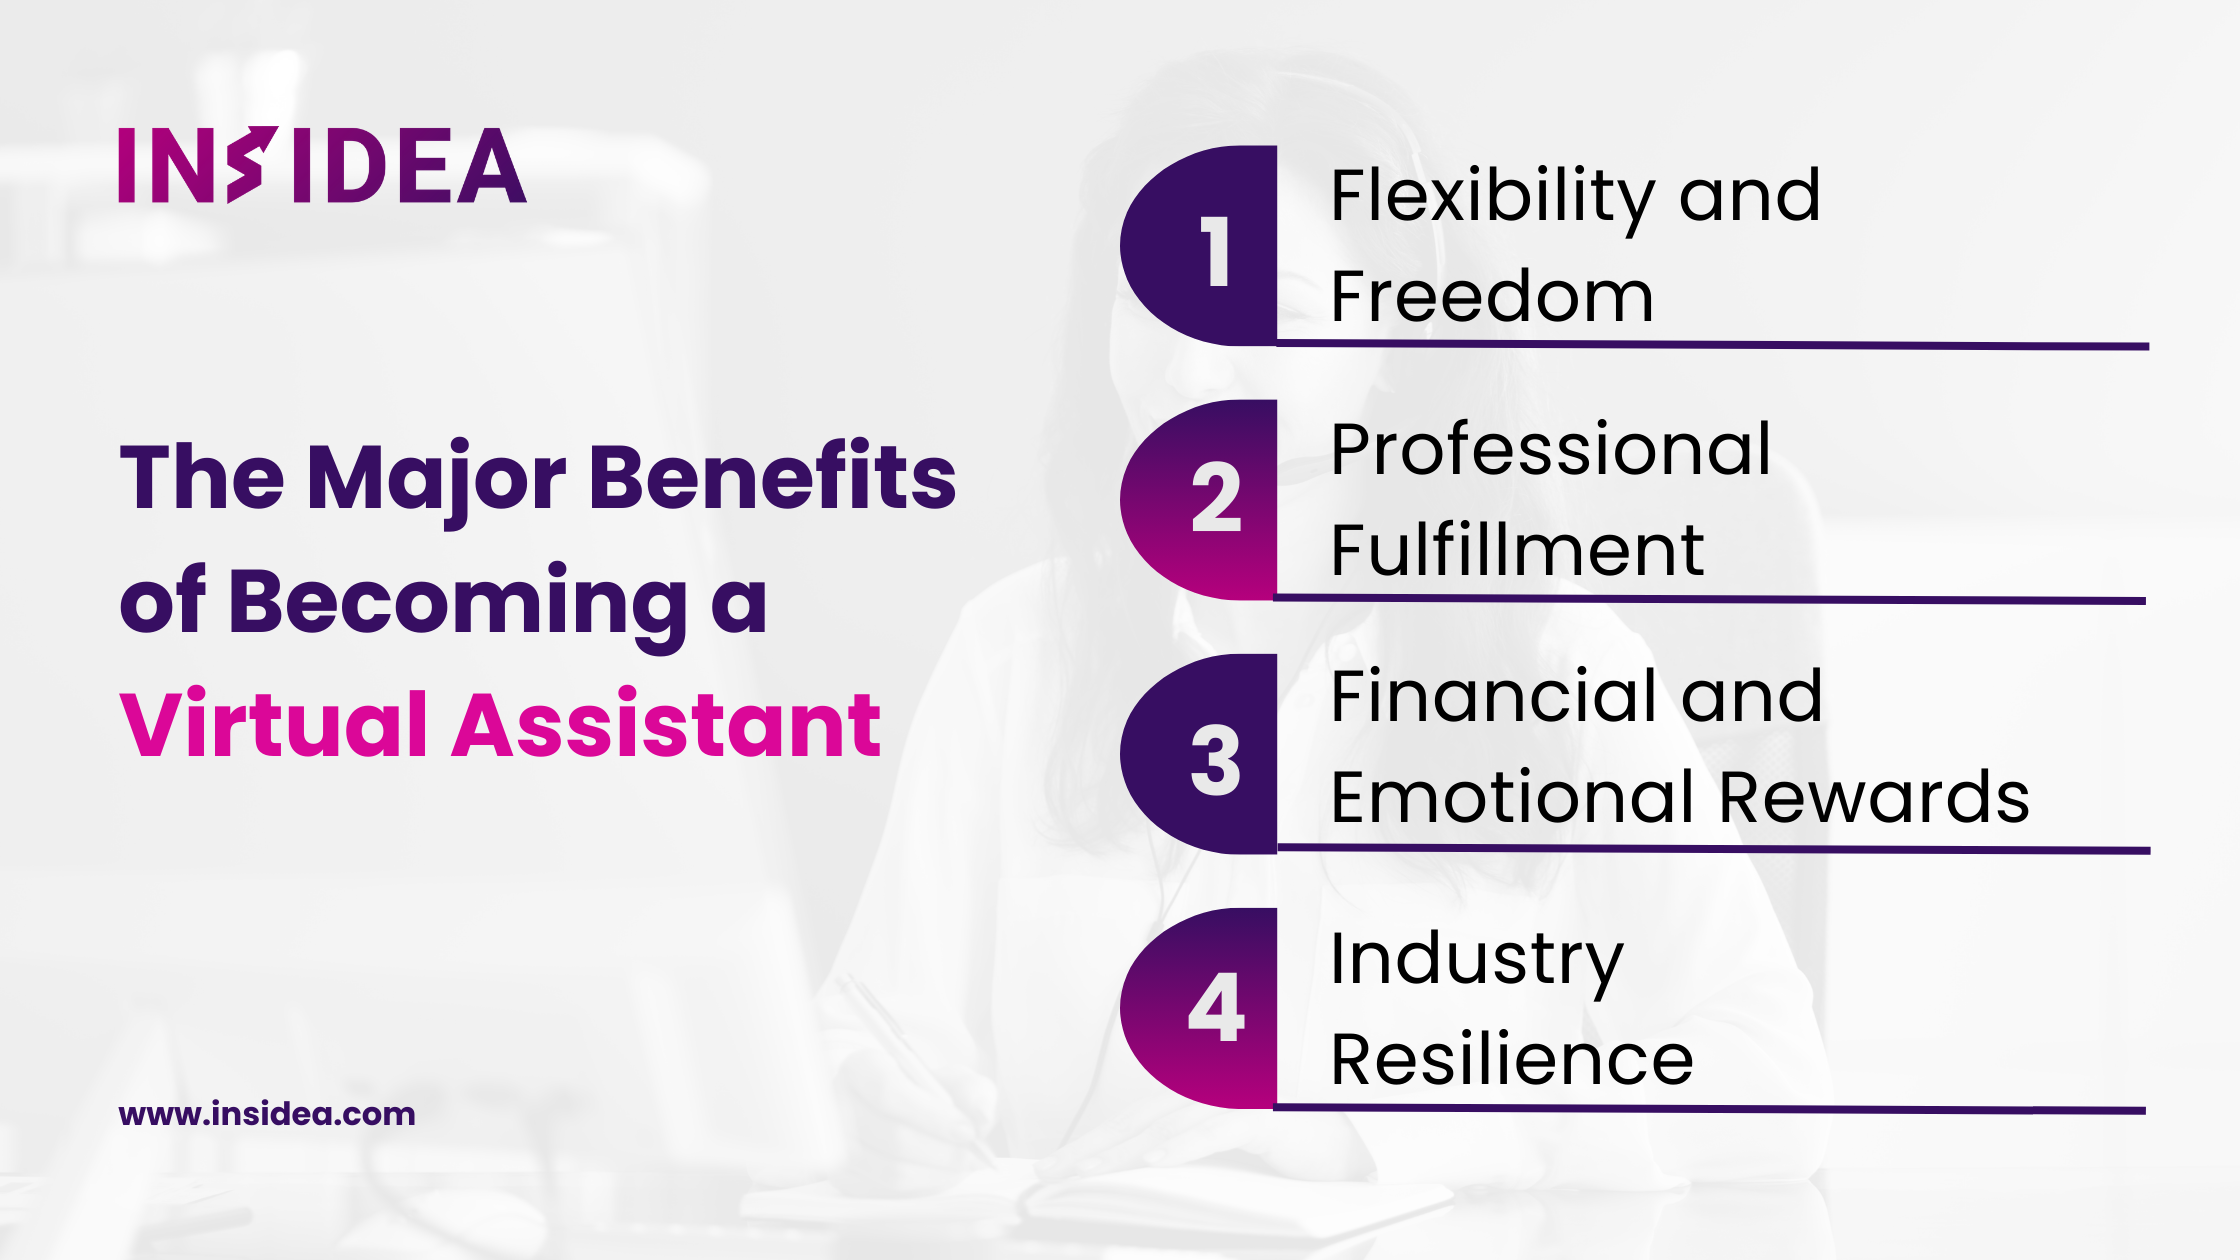 The Major Benefits of Becoming a Virtual Assistant